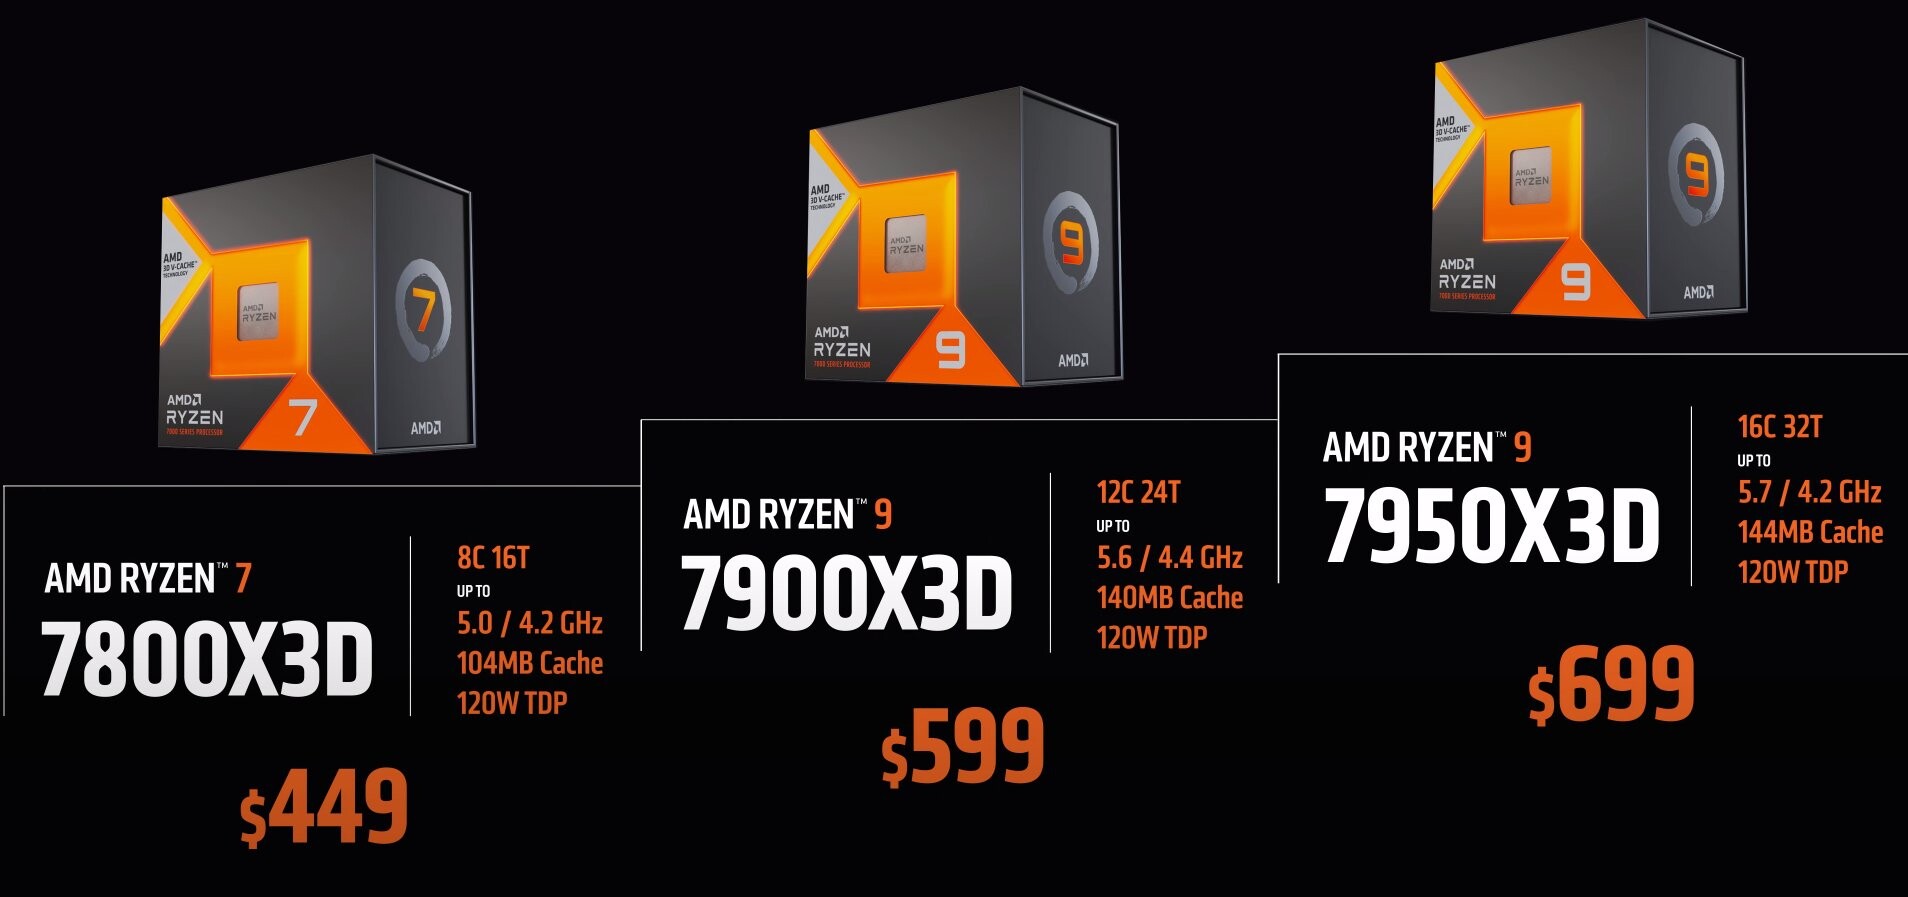 AMD Ryzen 7 7800X3D is again available for less than $349 